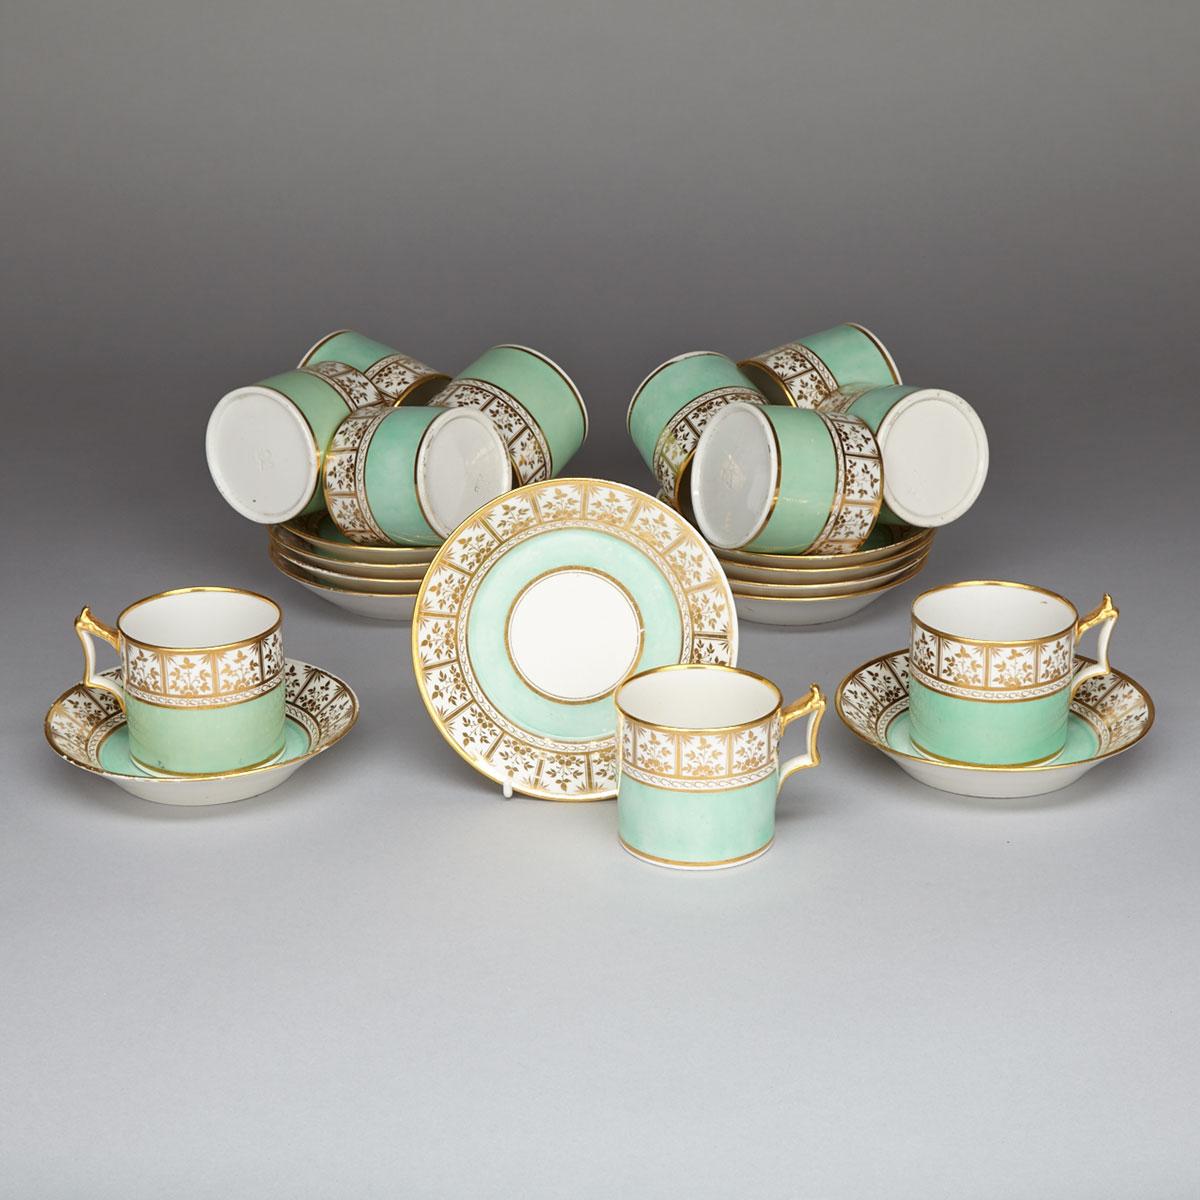 Eleven Flight, Barr & Barr Worcester Pale Green Banded Coffee Cans and Saucers, c.1815-20